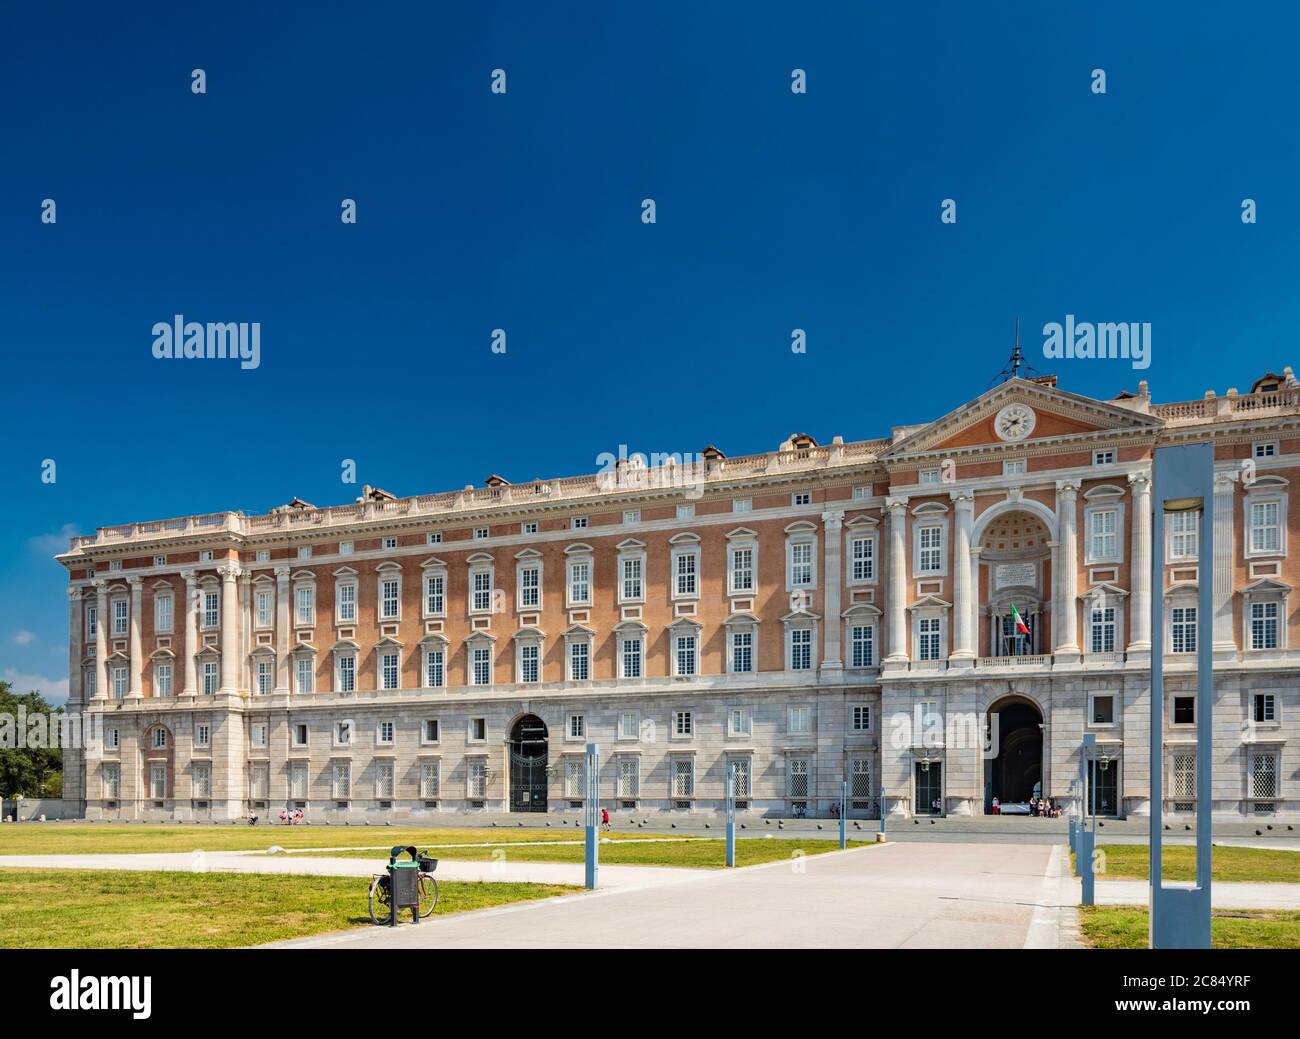 July 3, 2020 - Royal Palace of (Reggia di) Caserta - The facade of the majestic palace with the large avenue and the main entrance. Many windows, colu Stock Photo